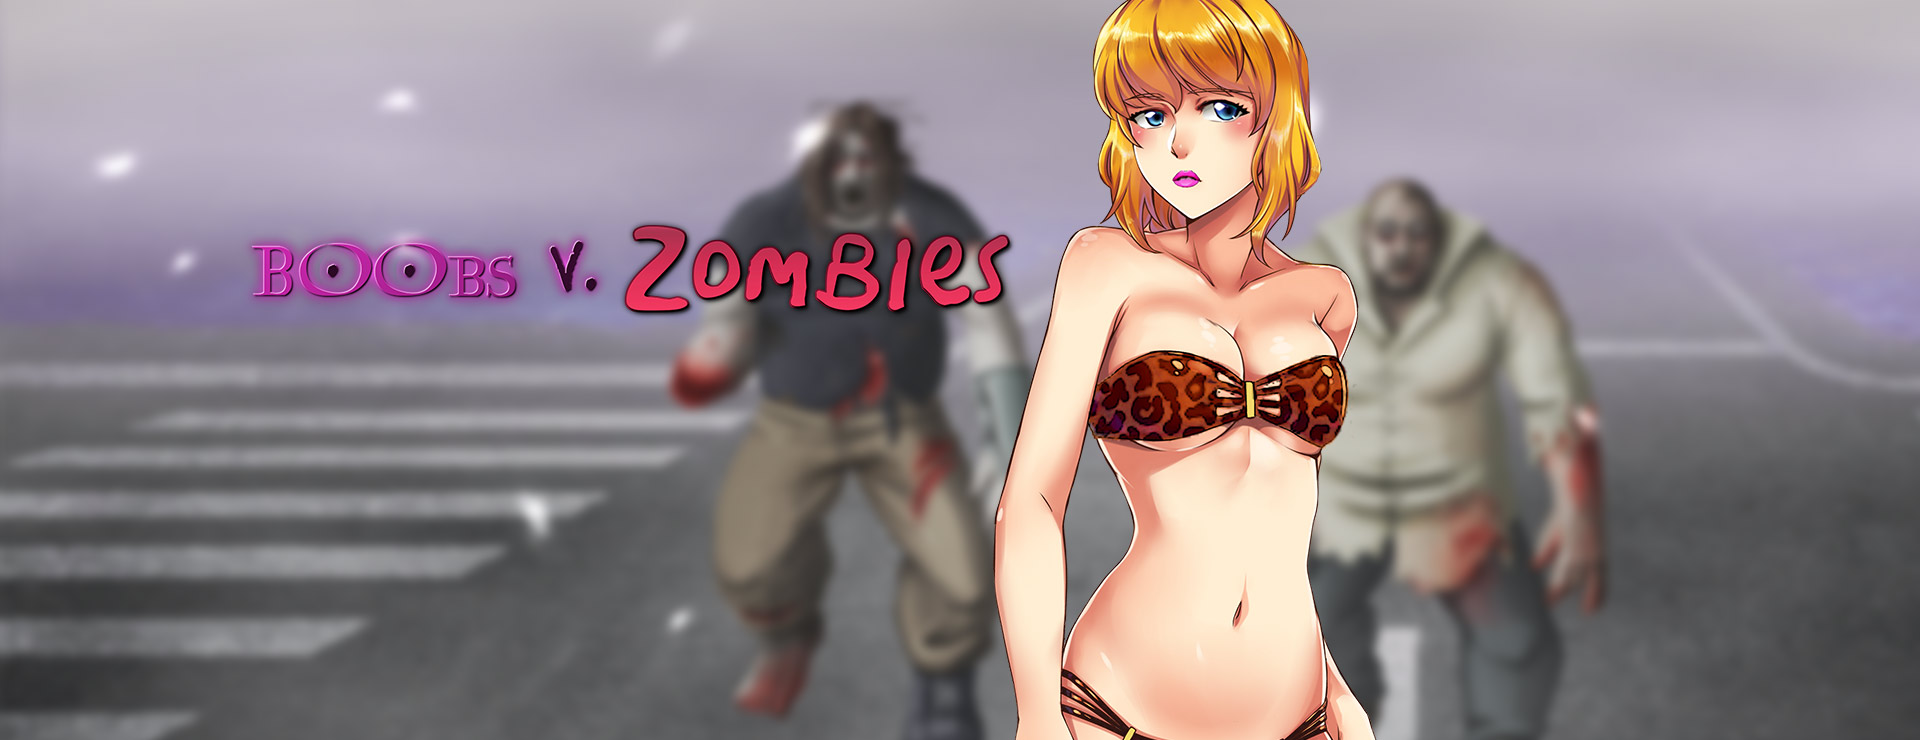 Boobs Vs Zombies - RPG Game